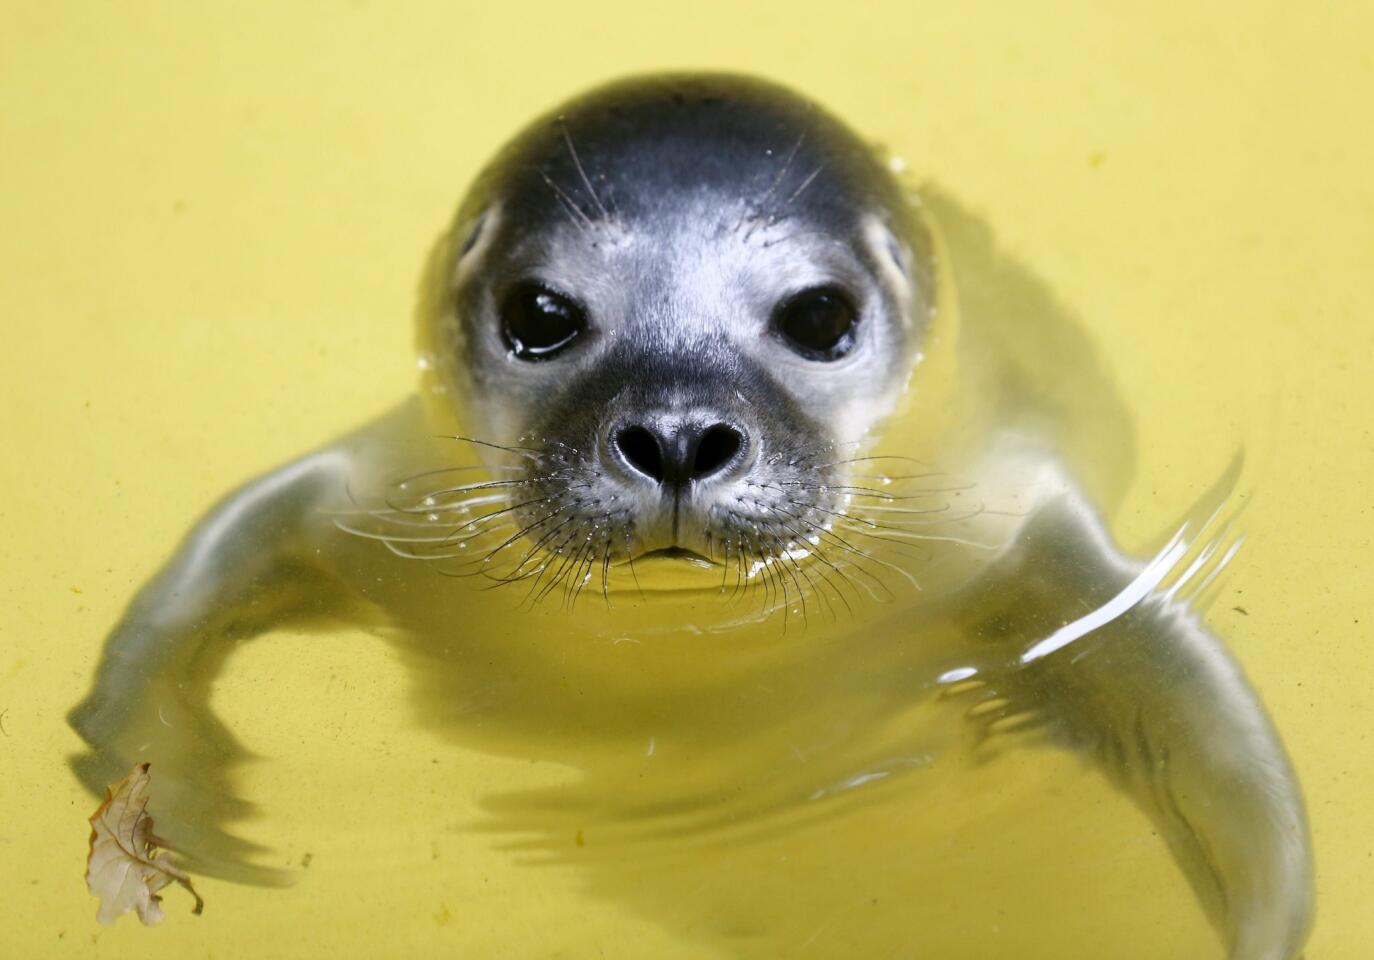 A 5-day-old baby seal swims at a zoo in Duisburg, Germany, on June 28, 2016.